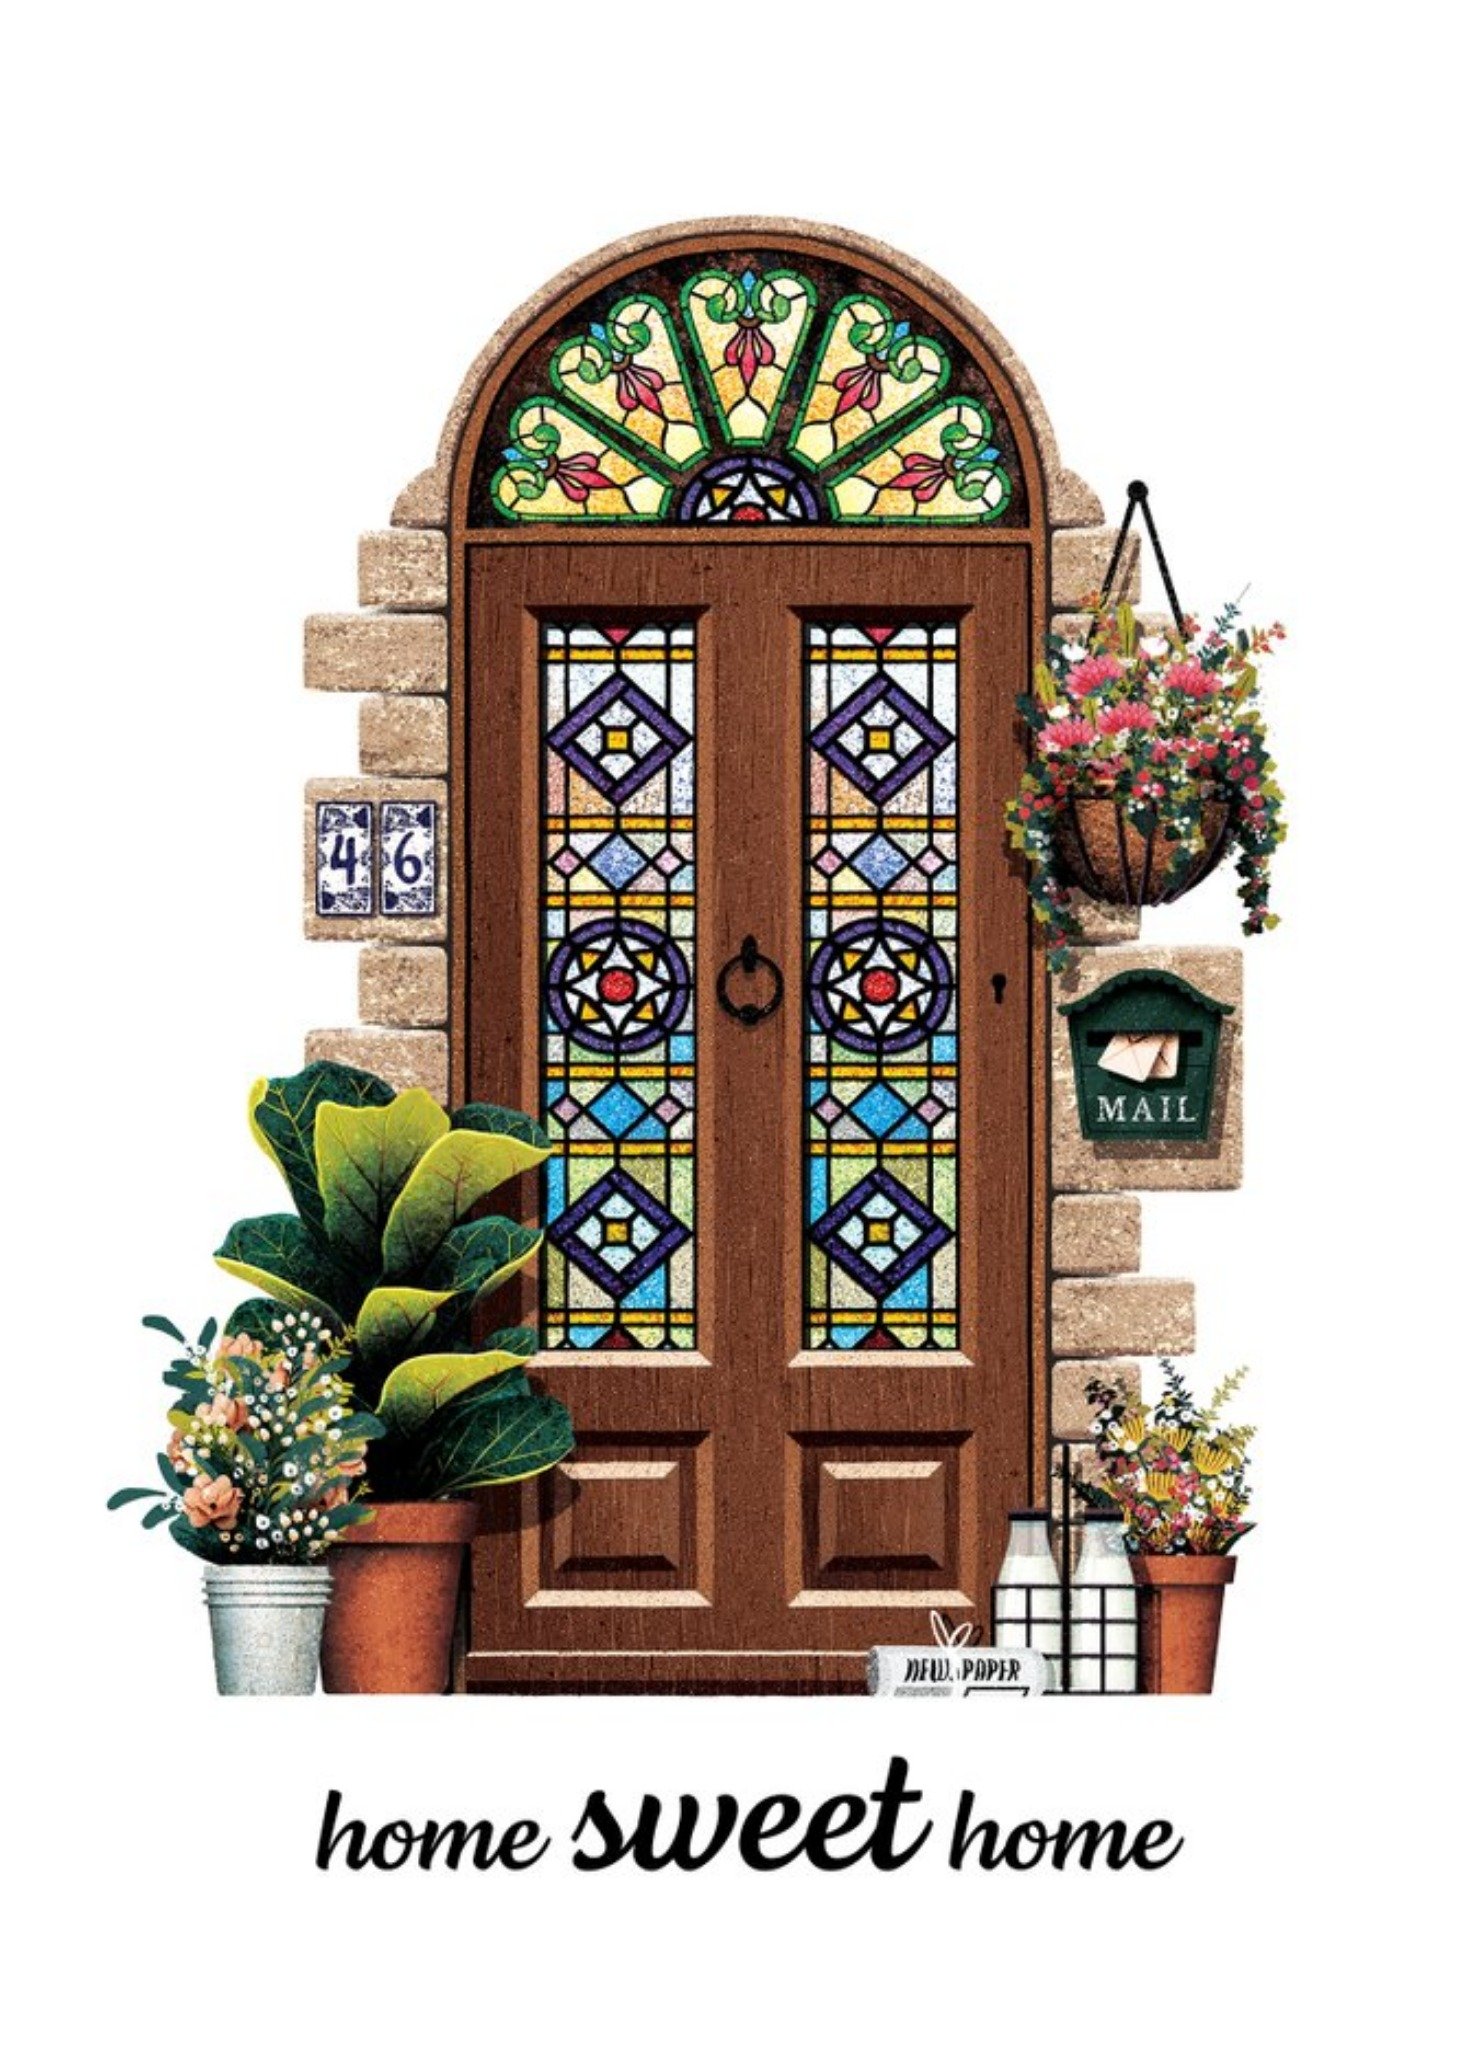 Friends Illustrated Ornate House Front Door With Stained Glass Home Sweet Home. , Large Card